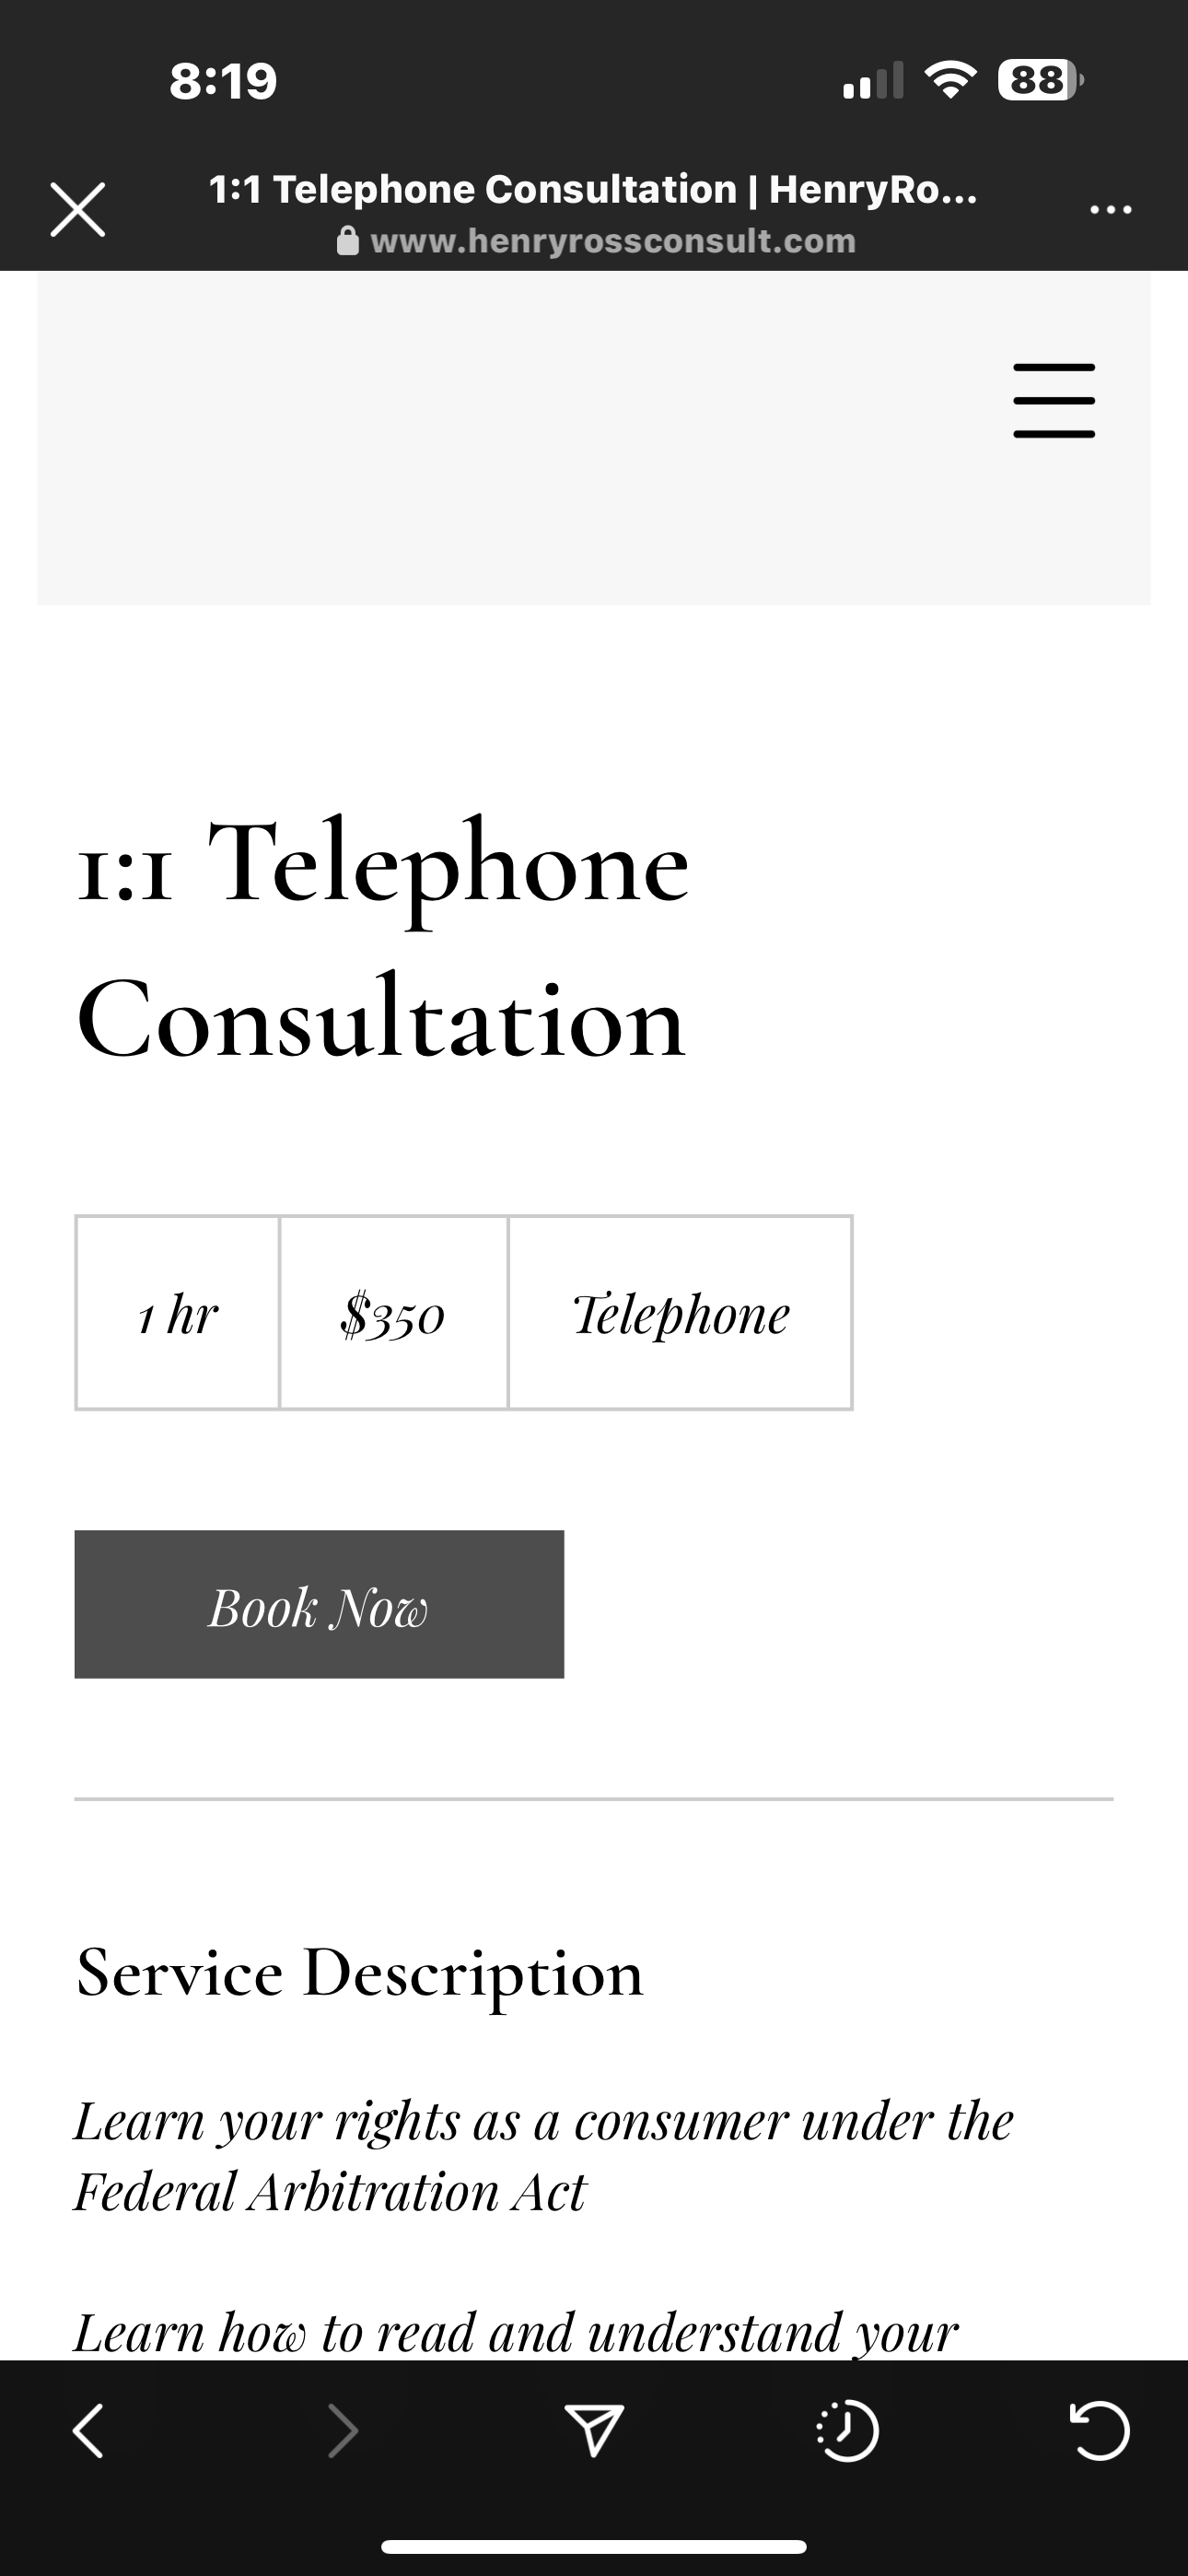 Their price for a consultation 